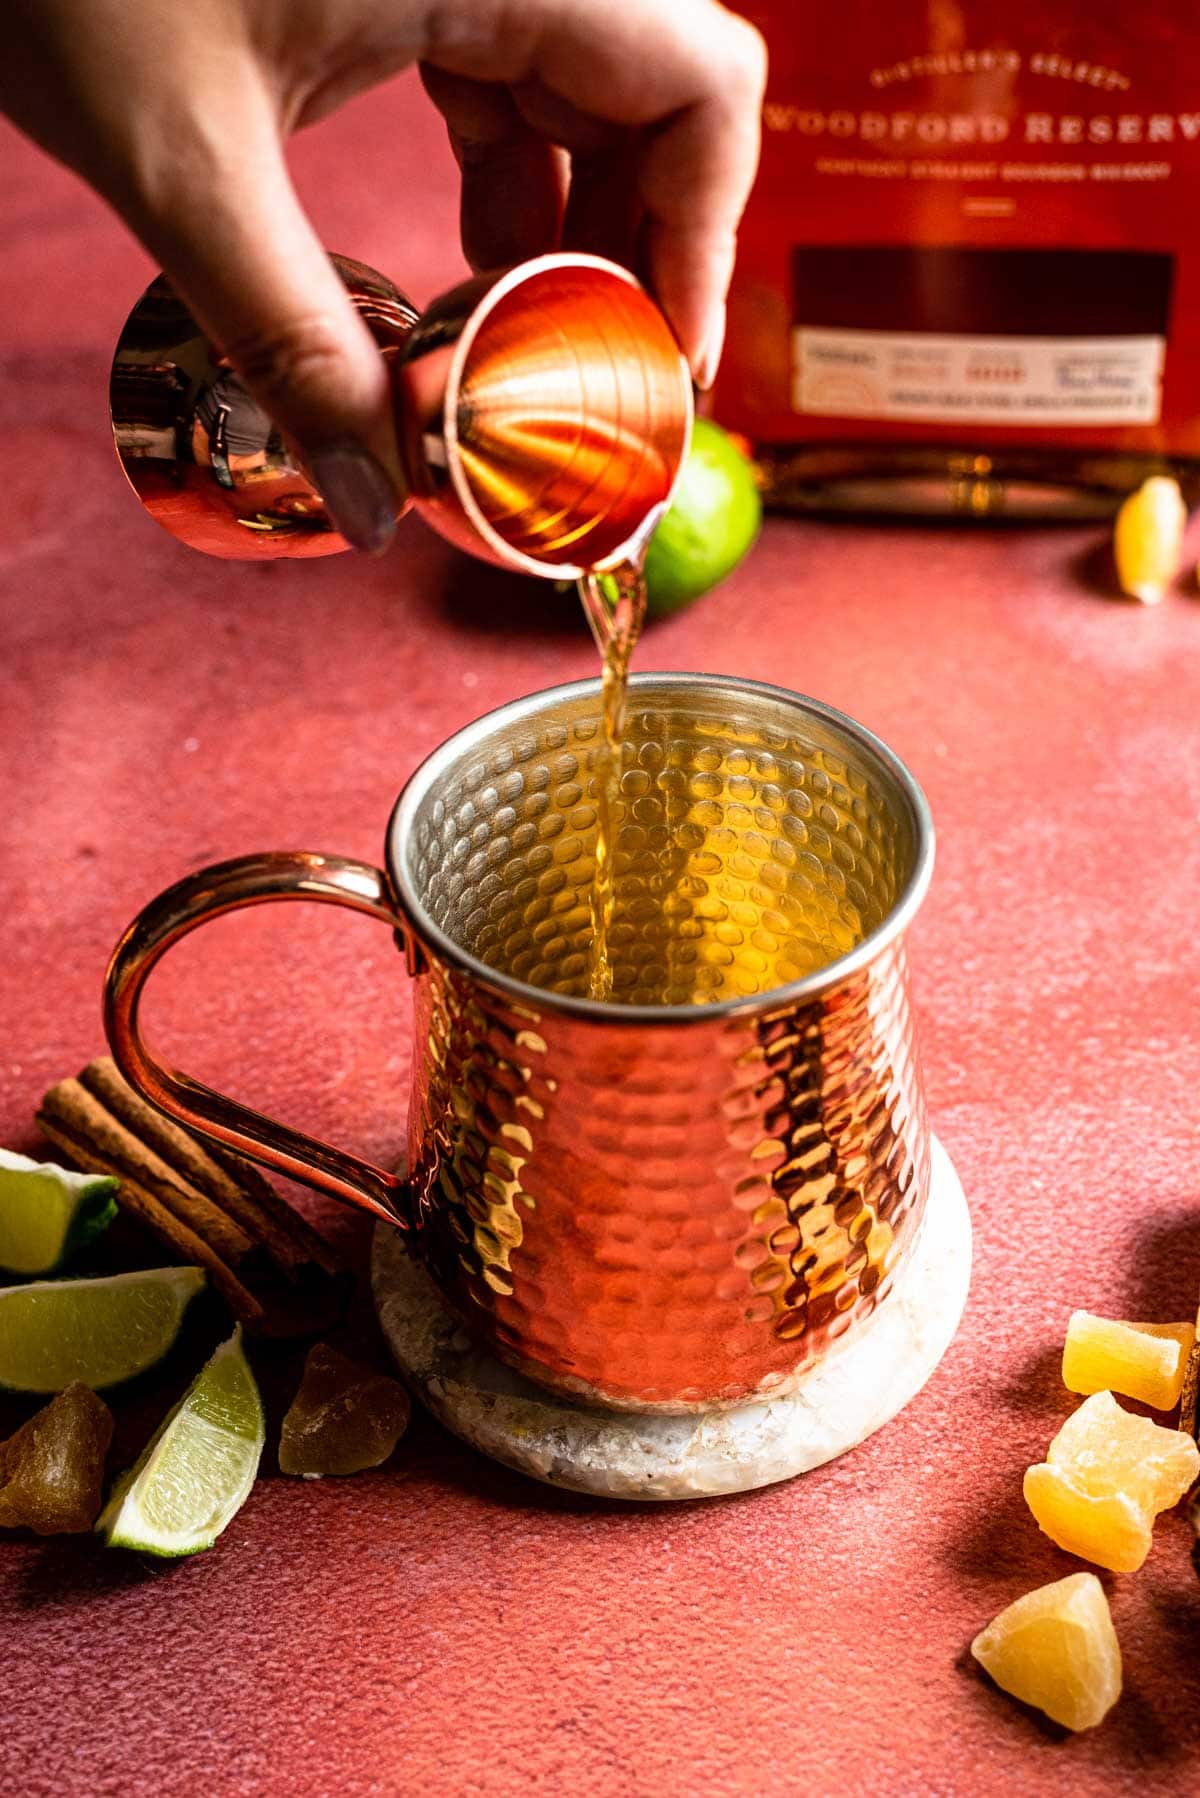 The bourbon being poured into a copper mug on a red stone table.